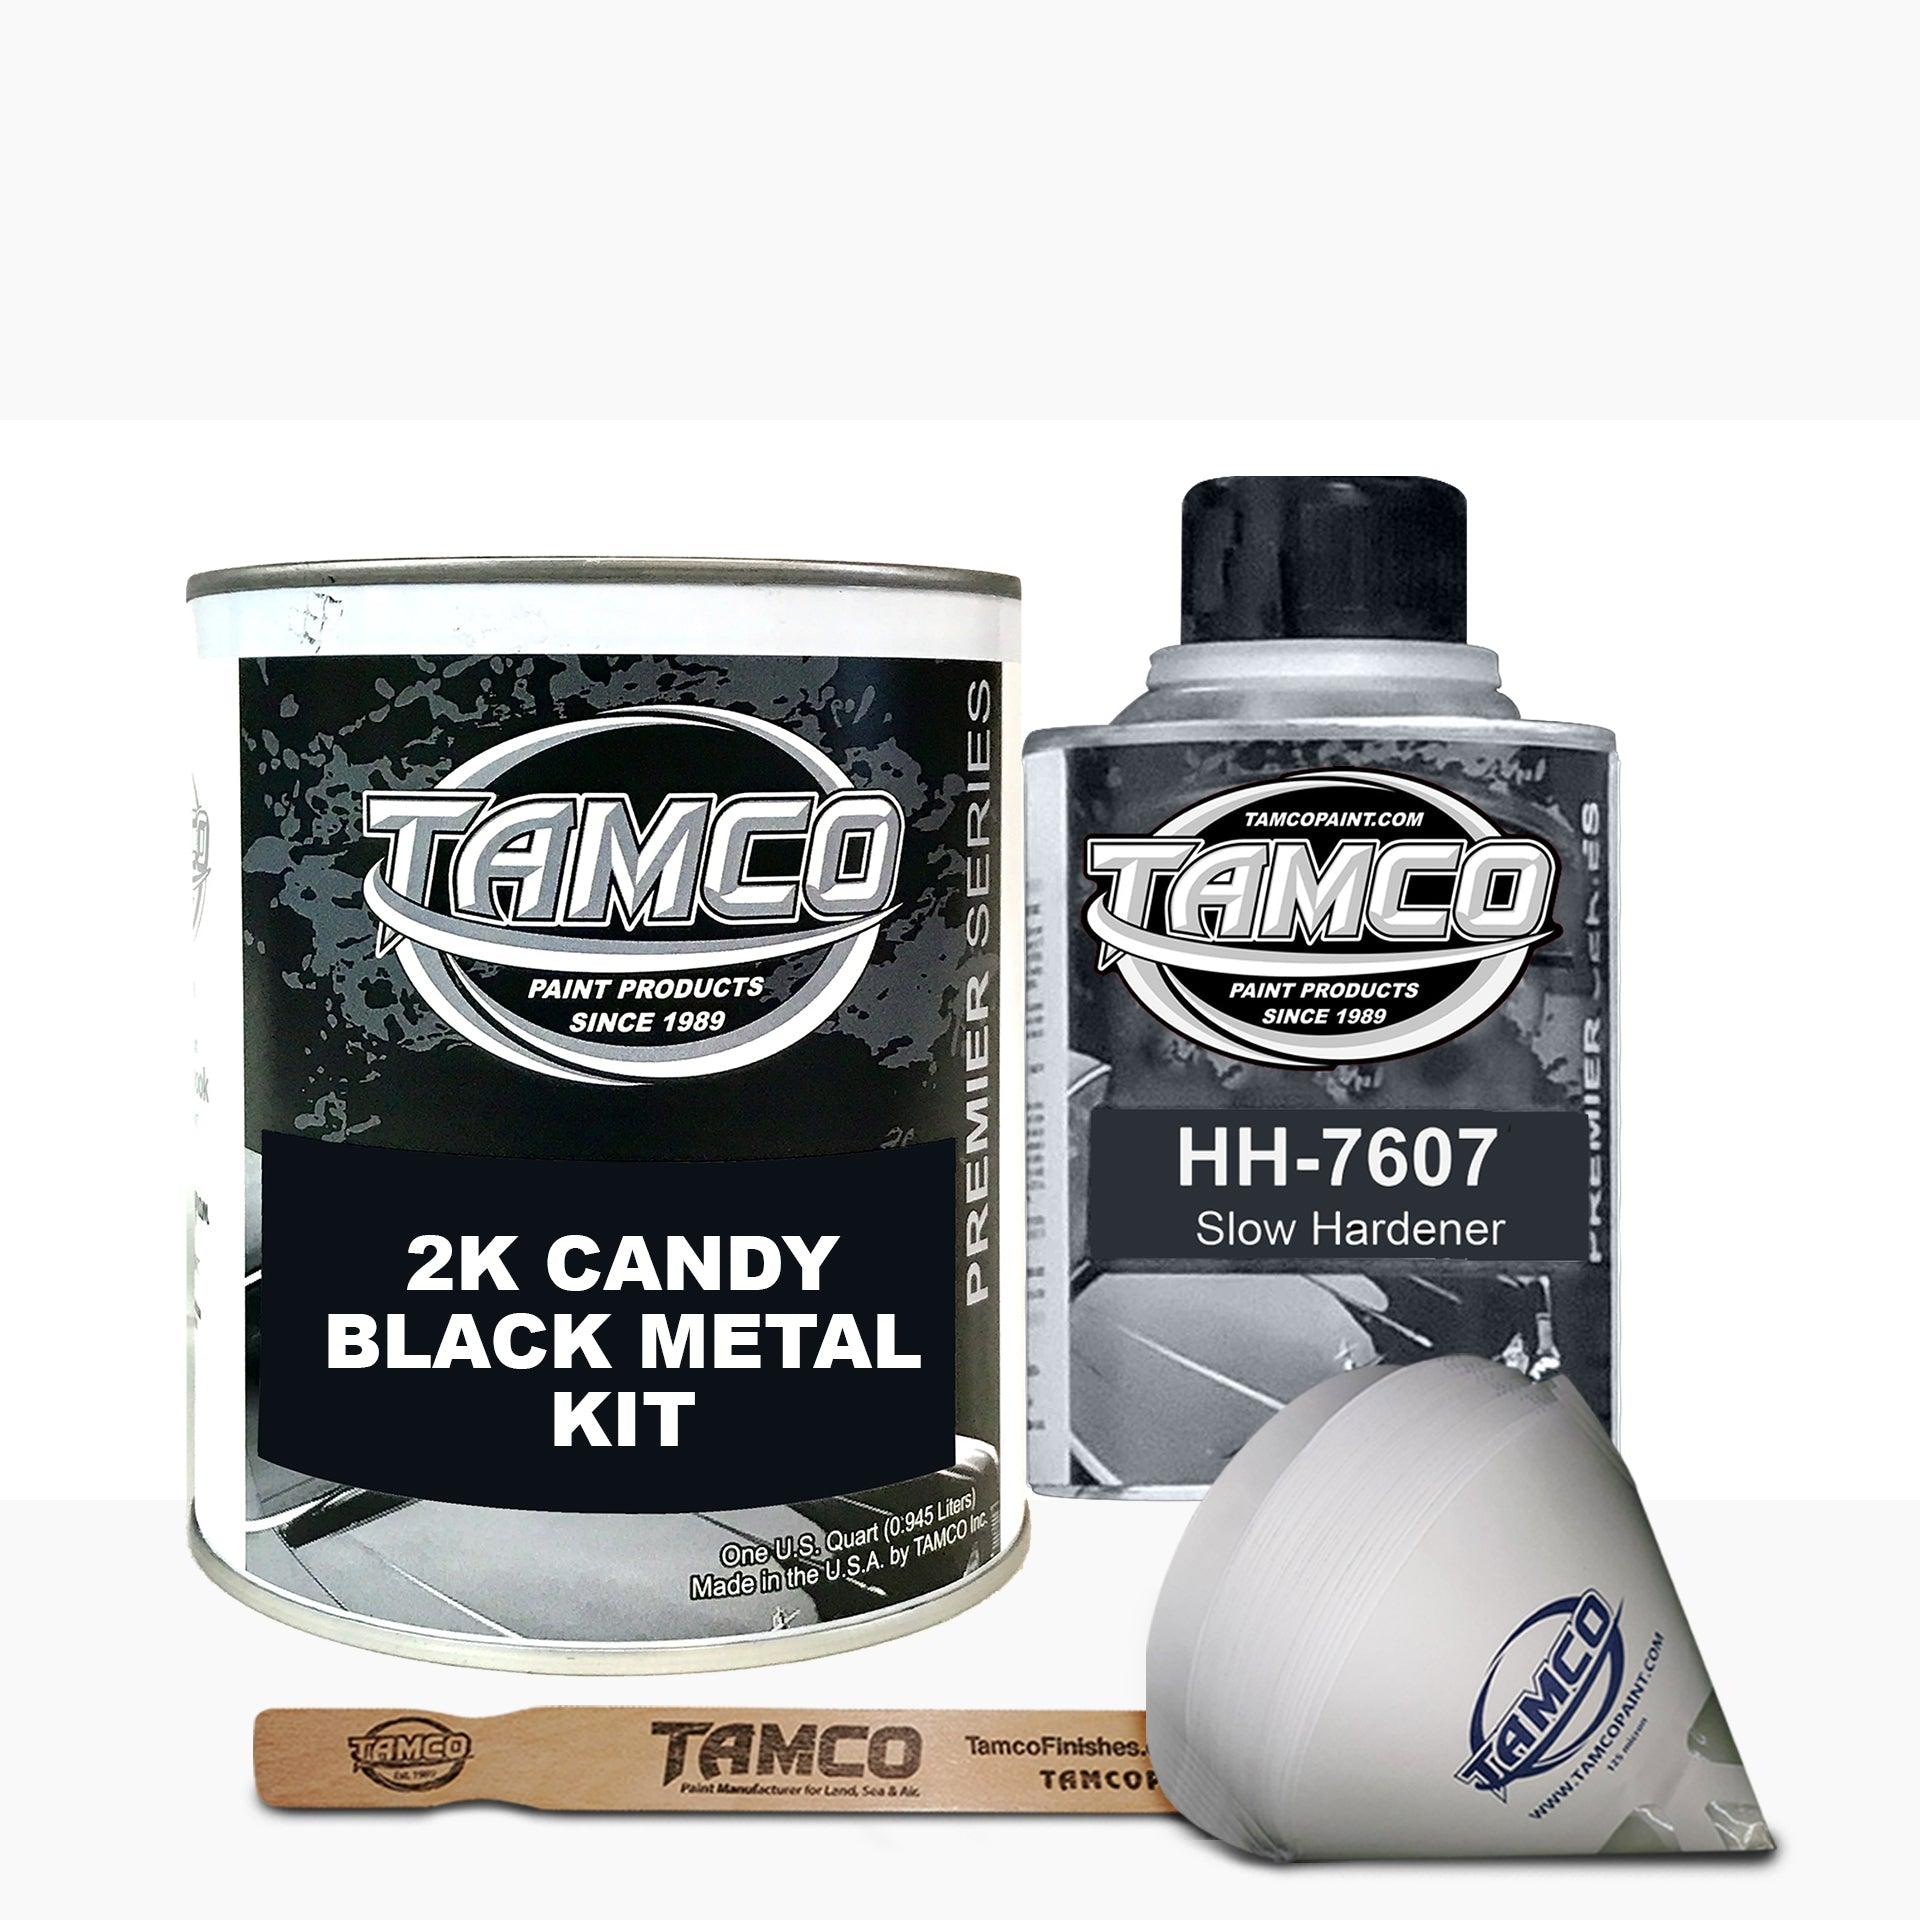 Black Metal 2k Candy 2 Go Kit - Tamco Paint